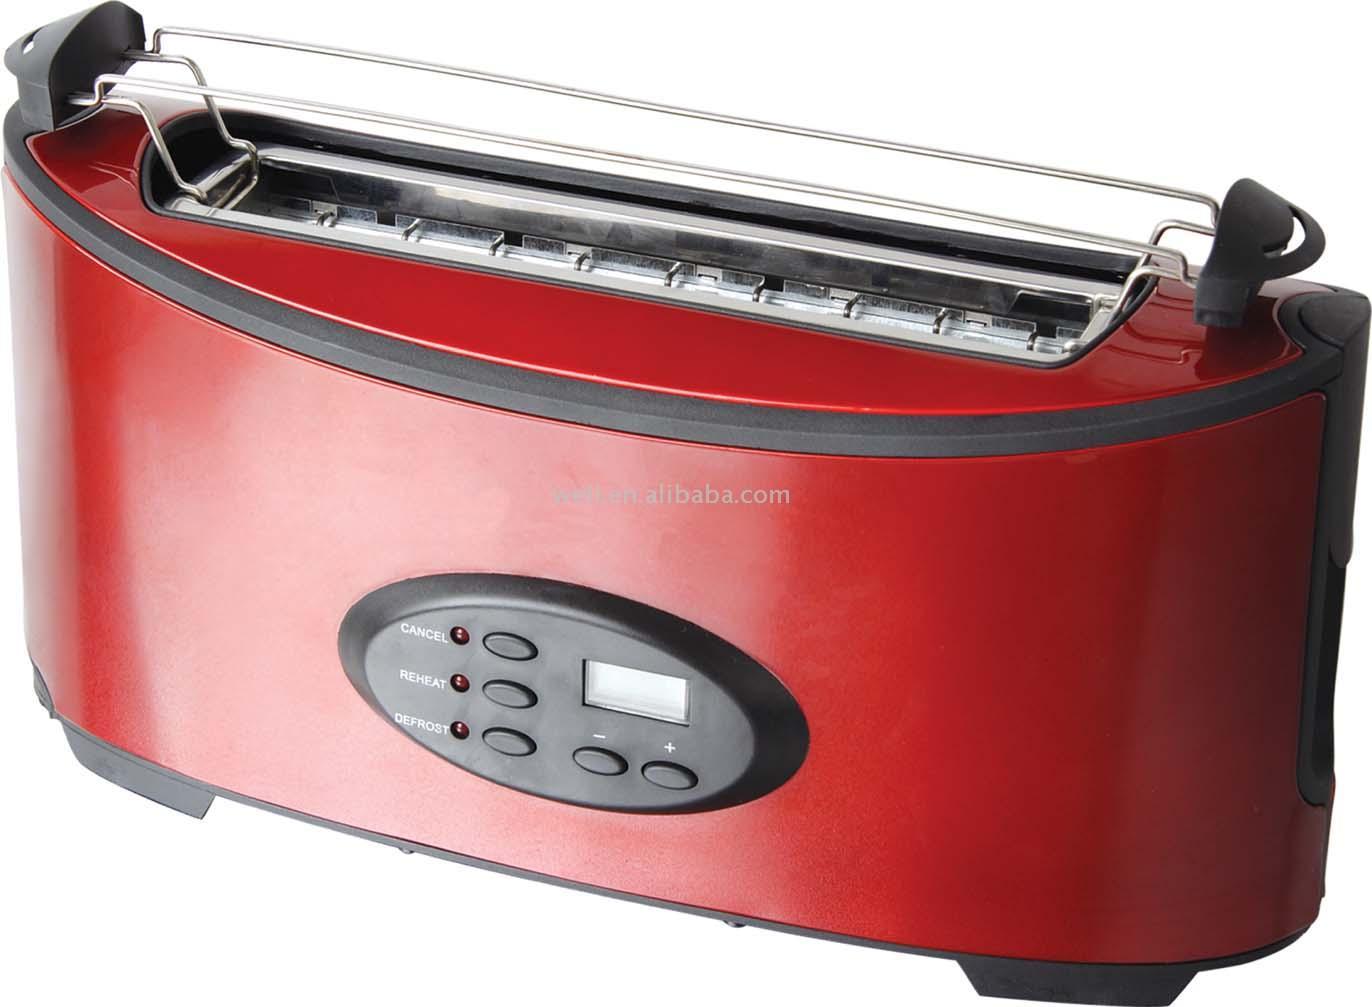 Electric S / S Pop-Up-Toaster (Electric S / S Pop-Up-Toaster)